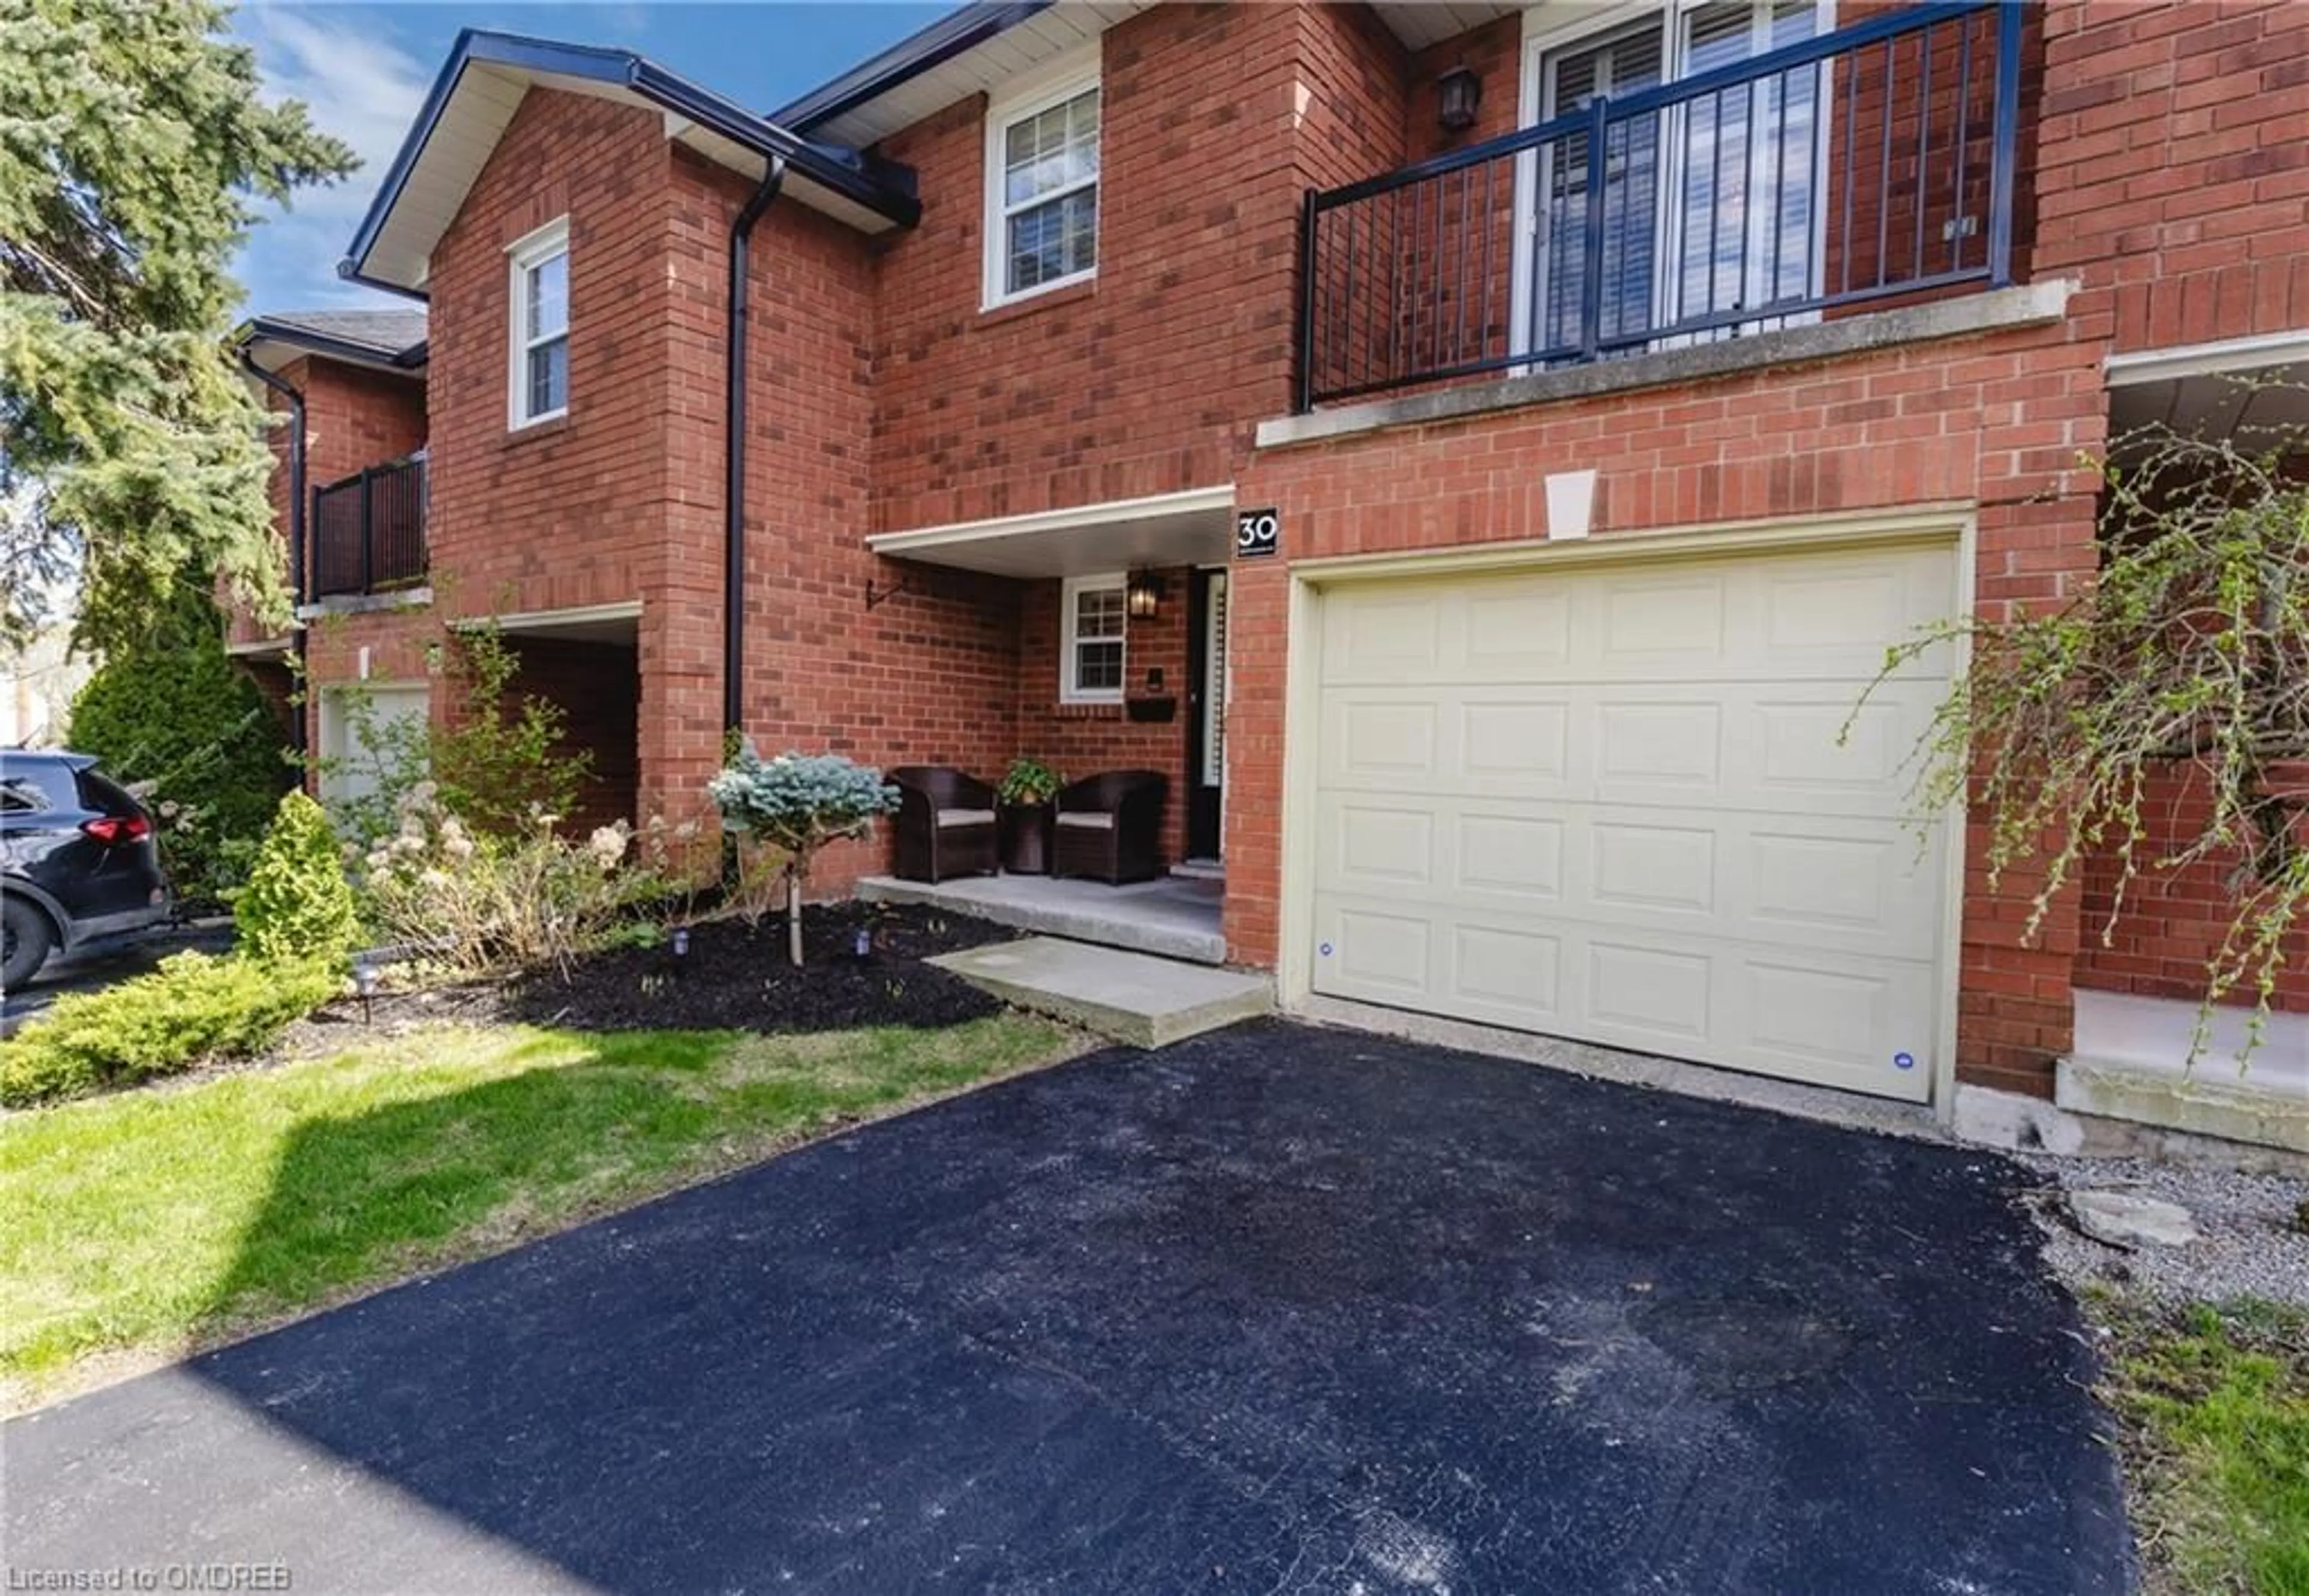 Home with brick exterior material for 3125 Pinemeadow Dr #30, Burlington Ontario L7M 3T7